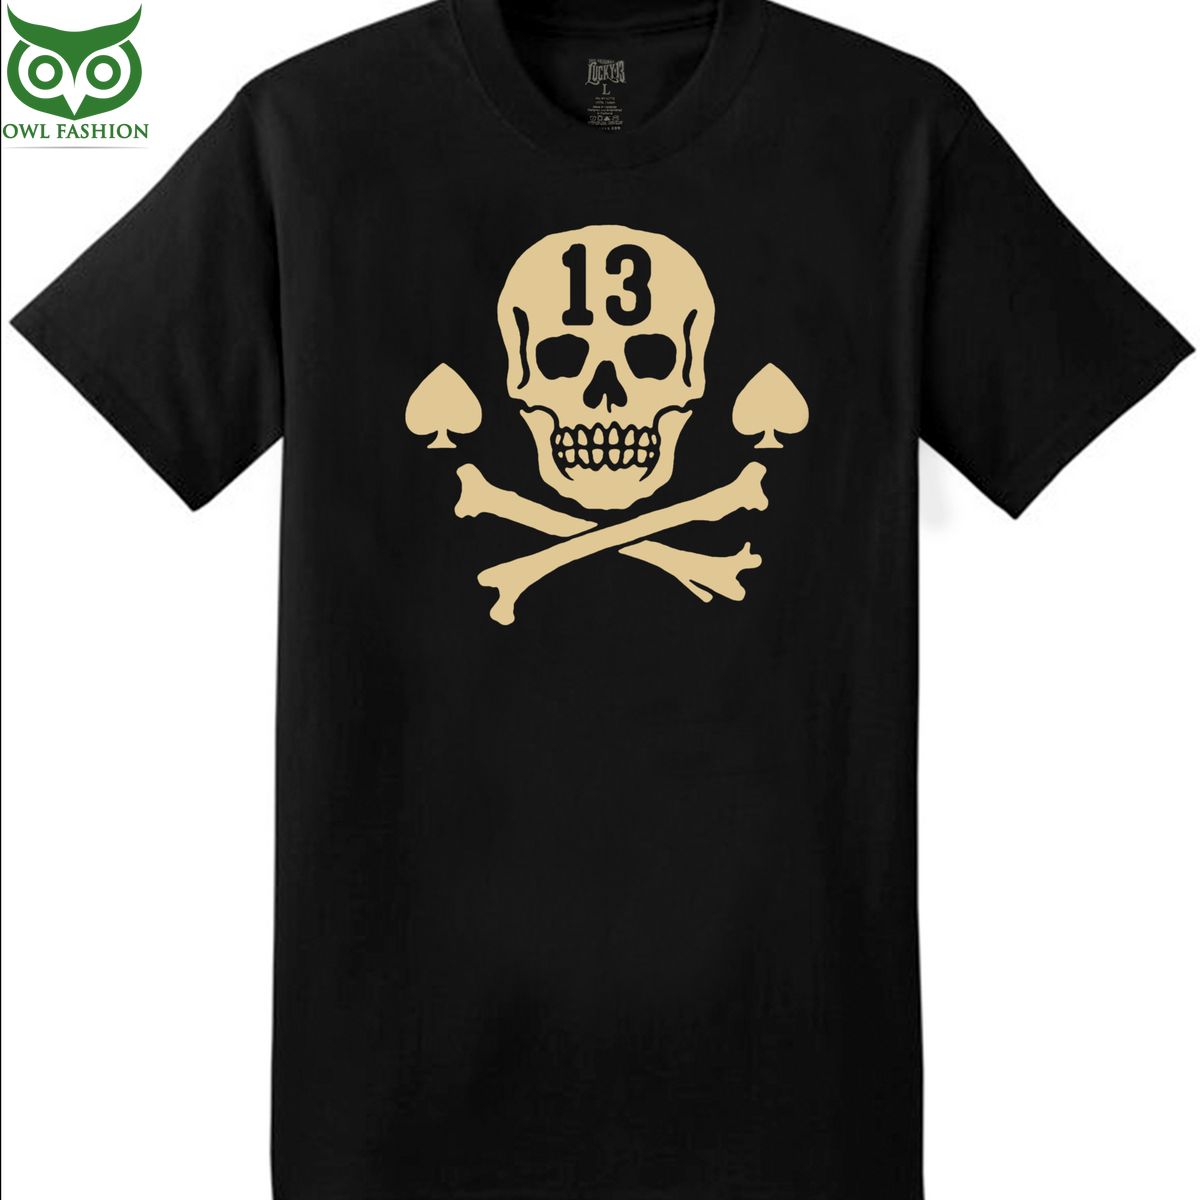 The pirate skull men lucky 13 t shirt This design has a strong visual impact.